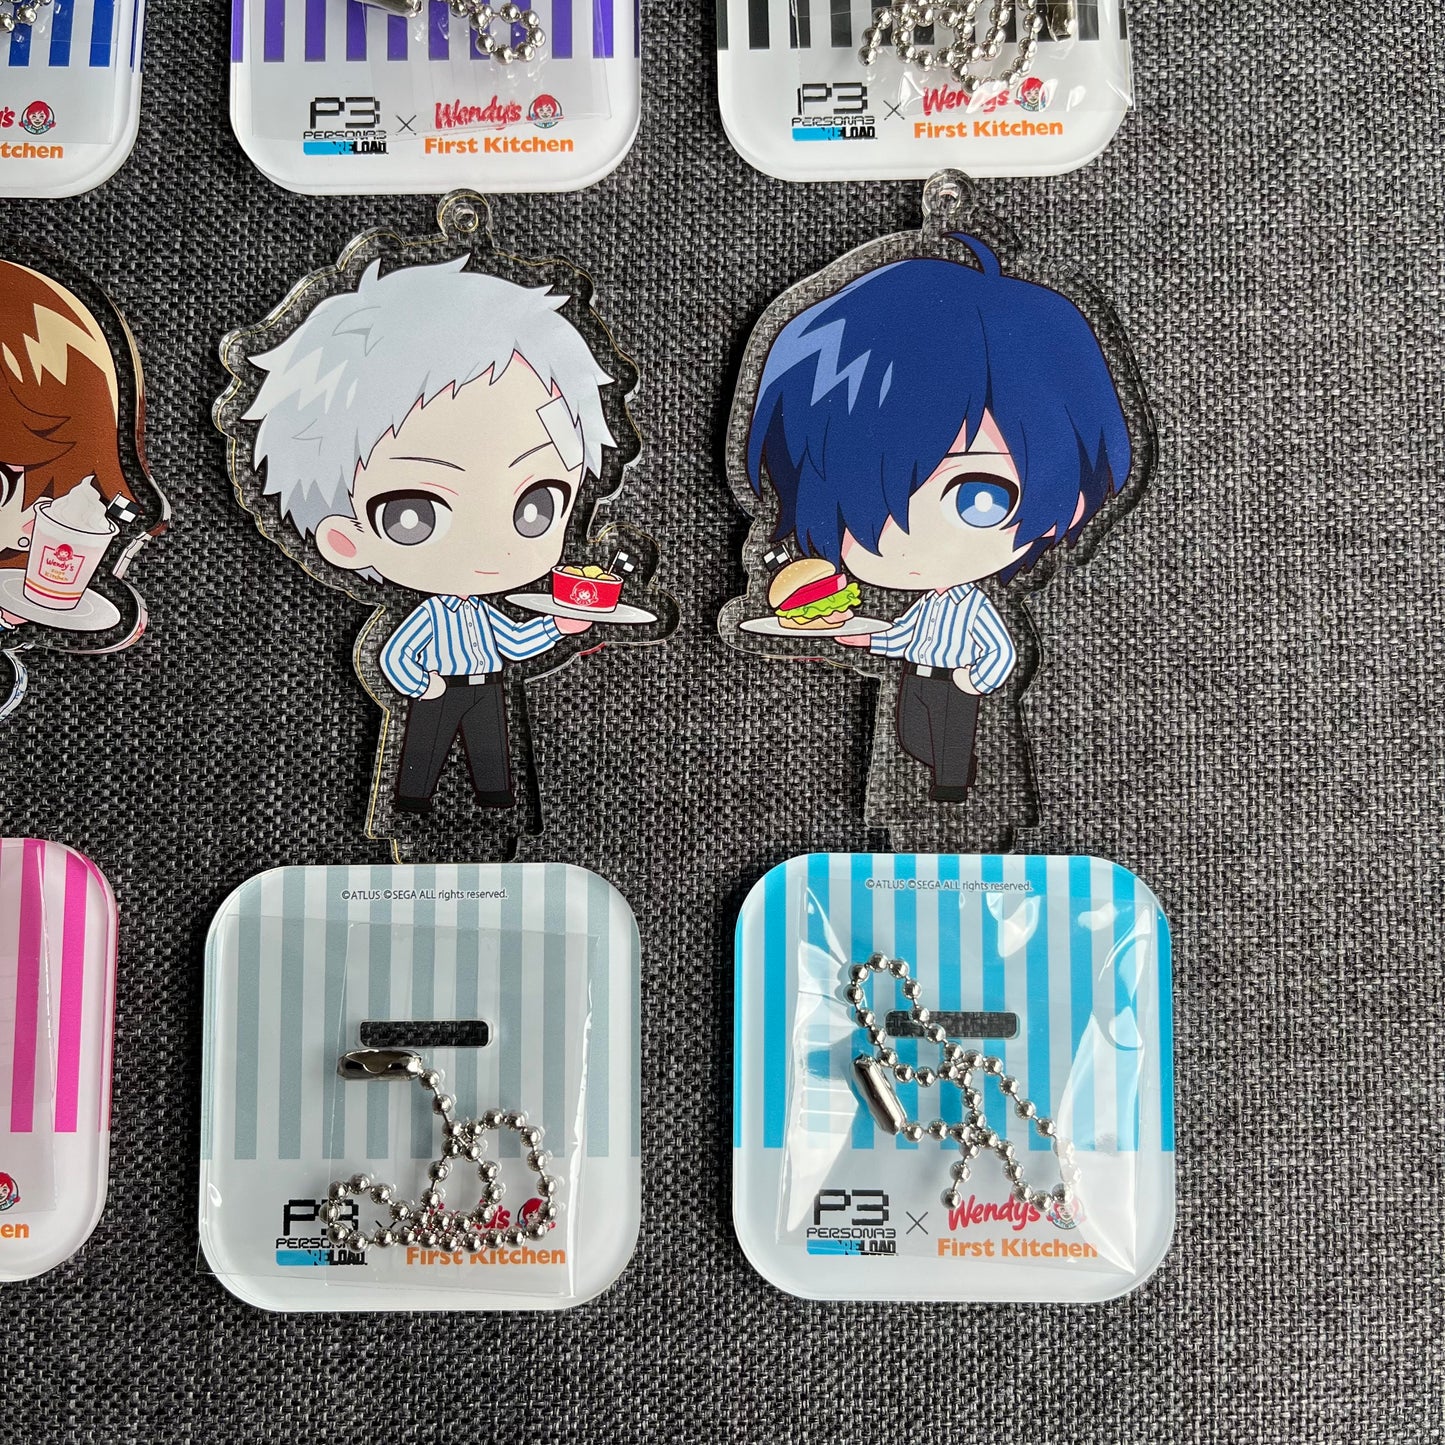 Persona 3 x Wendy’s Collab Acrylic Standees / Charms